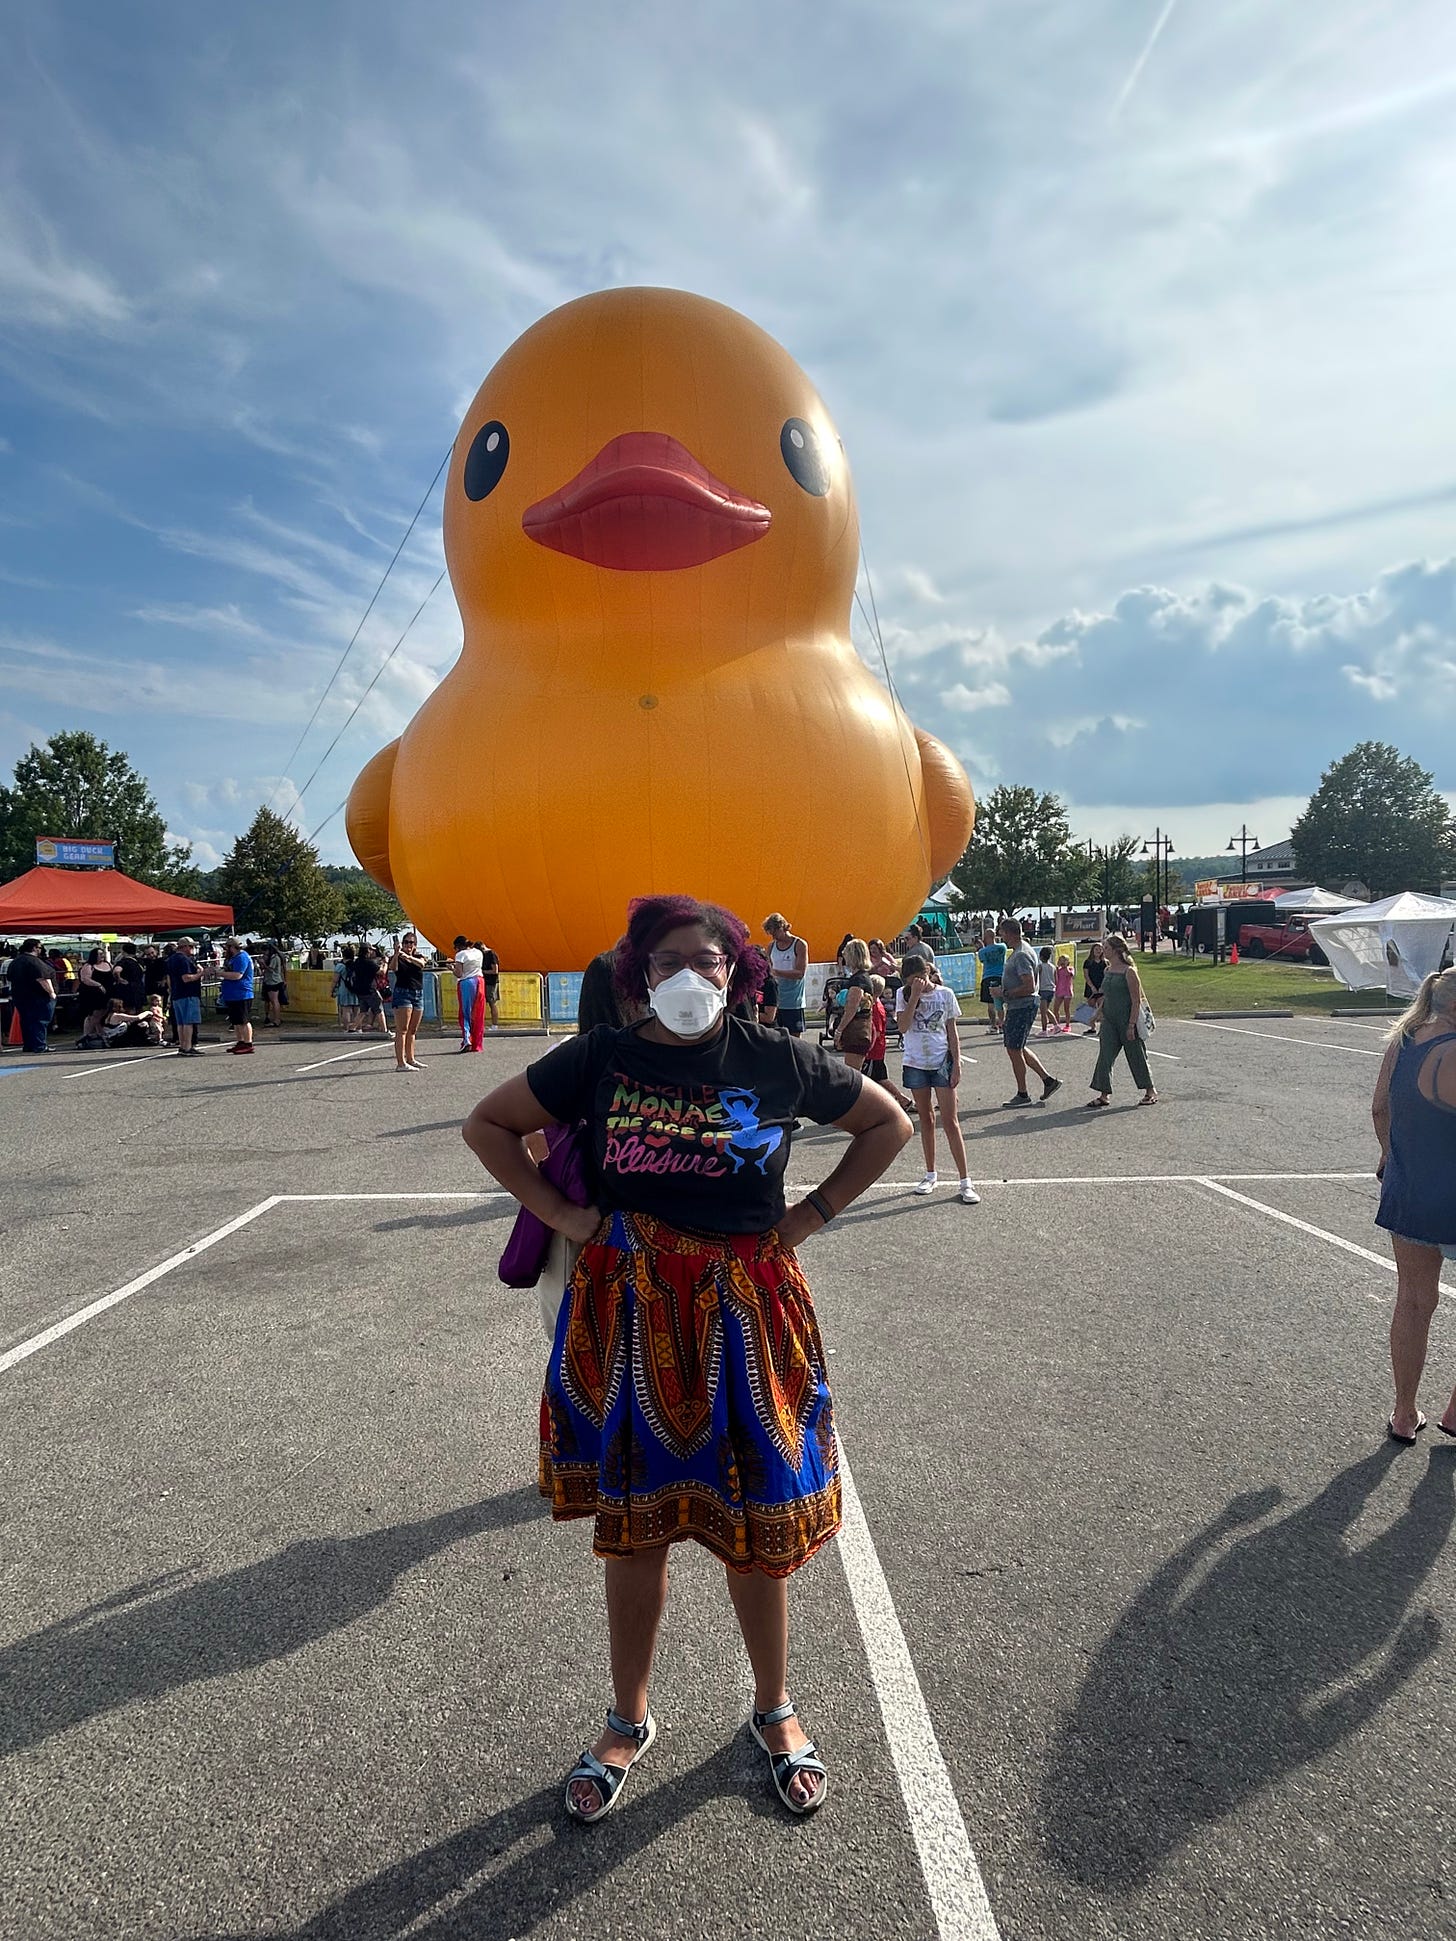 Kristen is standing, masked and arms on hips, in a Janelle Monae t-shirt,in front of a large inflatable object in the shape of a yellow plastic duck